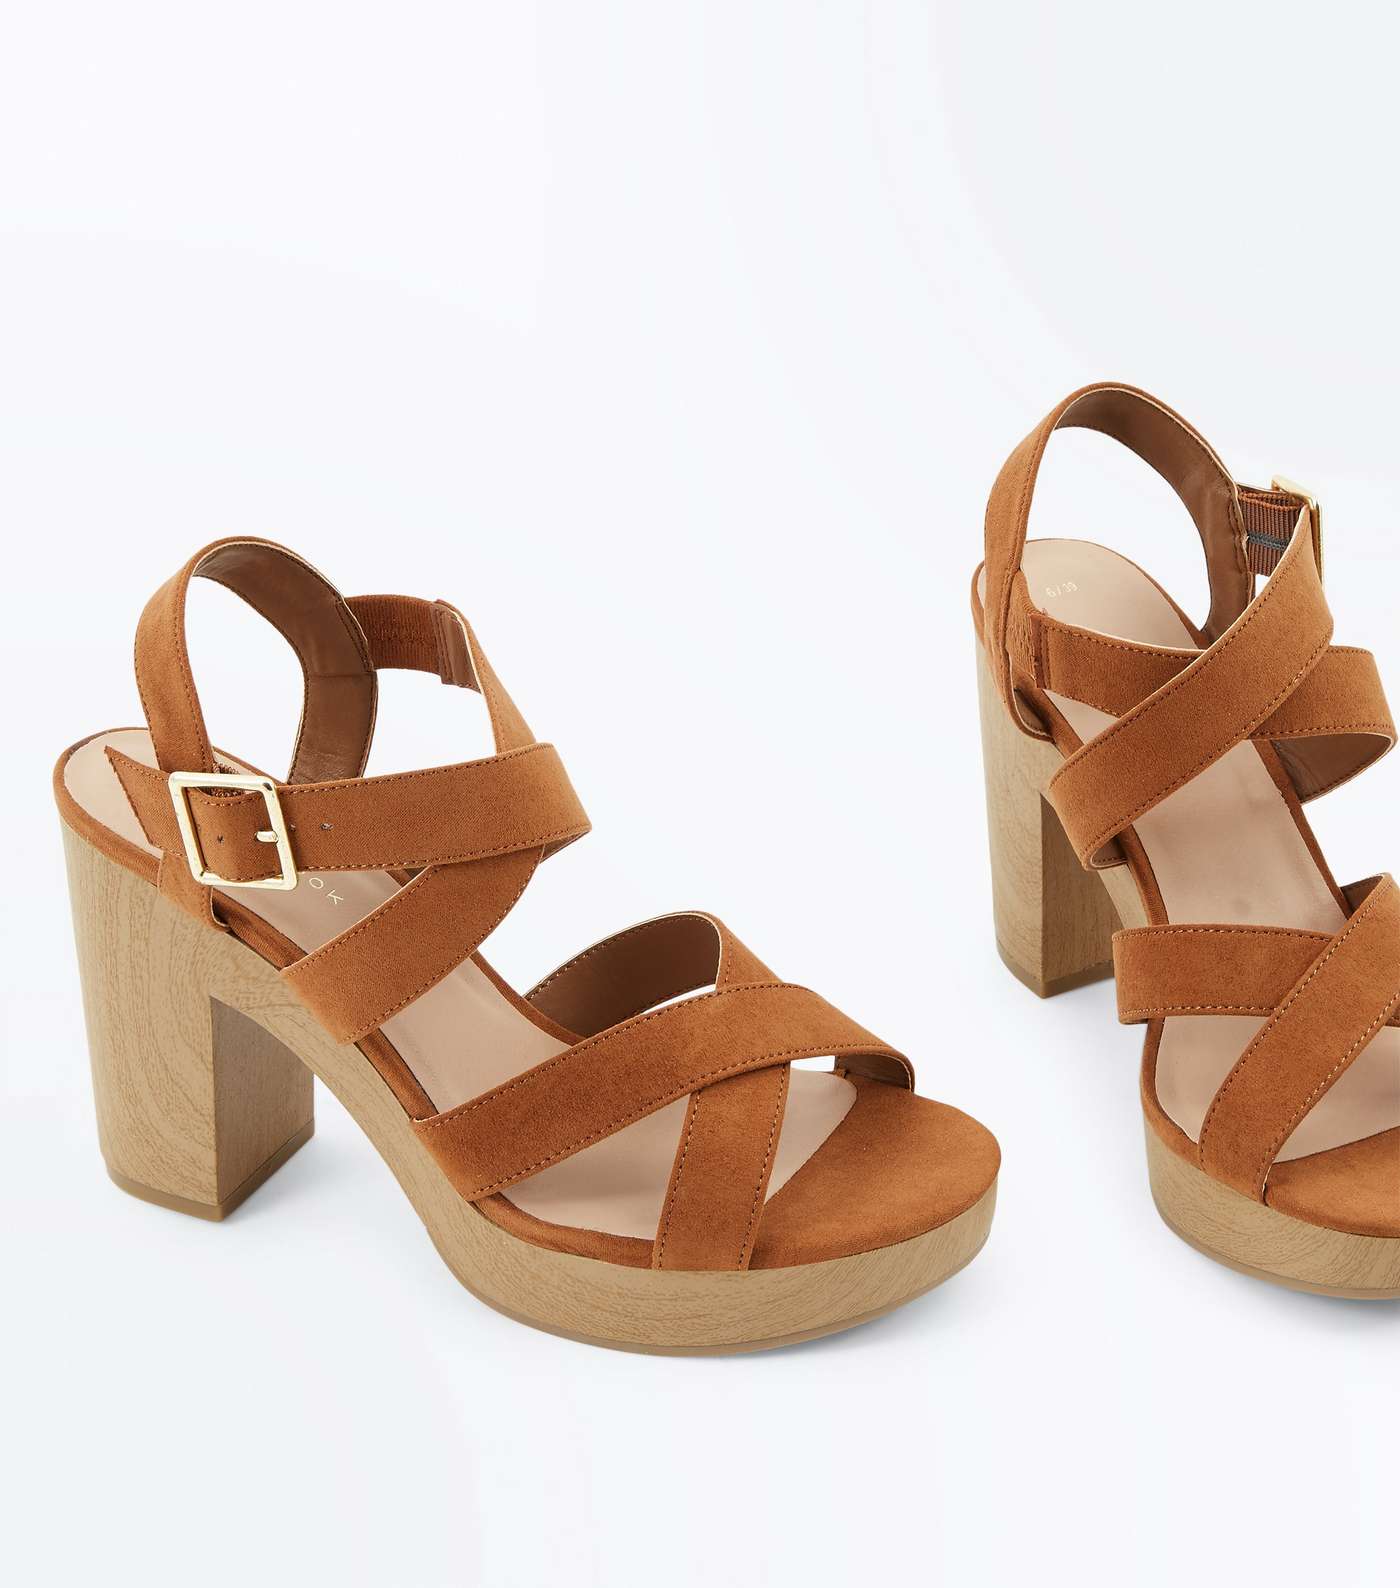 Tan Suedette Strappy Wooden Sole Sandals Image 3